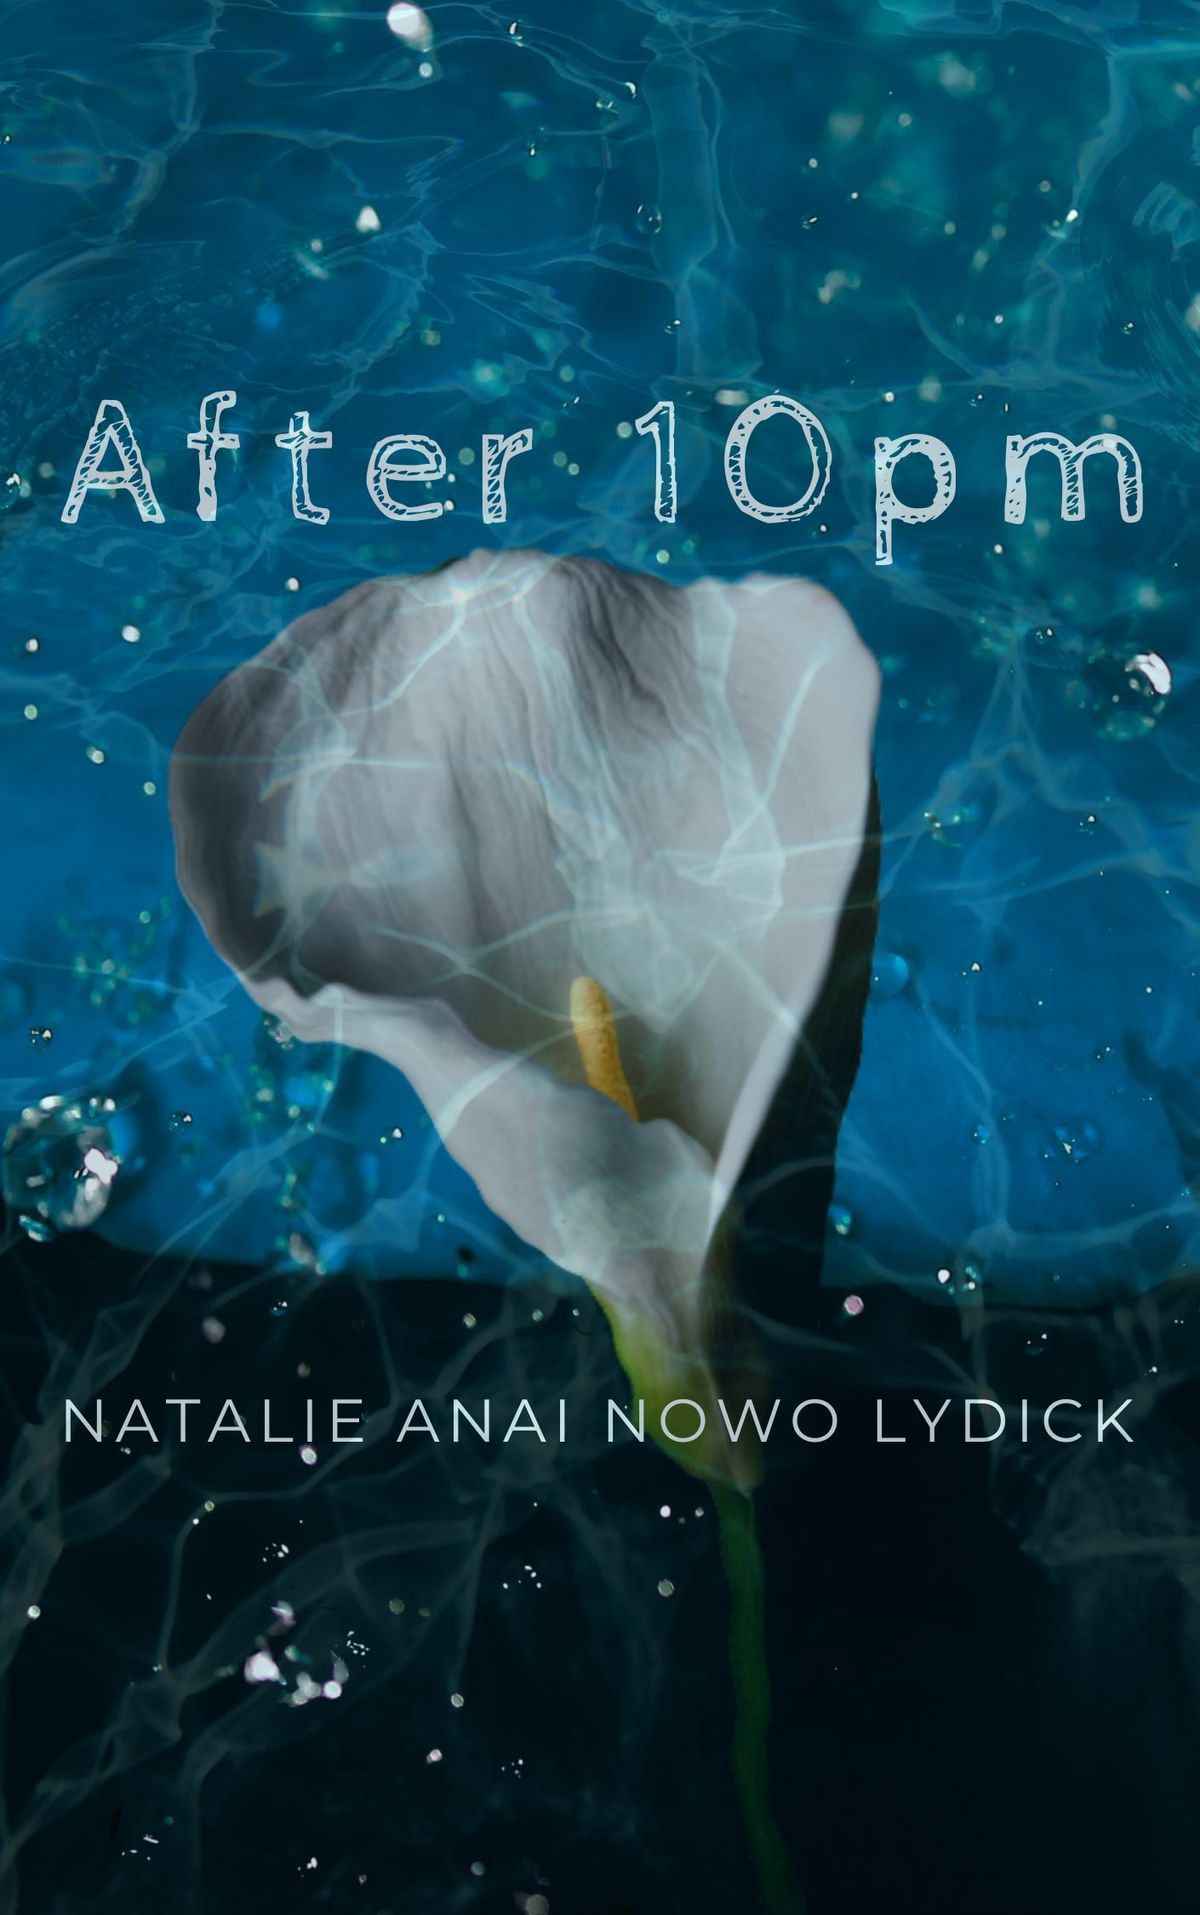 After 10pm: a story by Natalie Anai Nowo Lydick